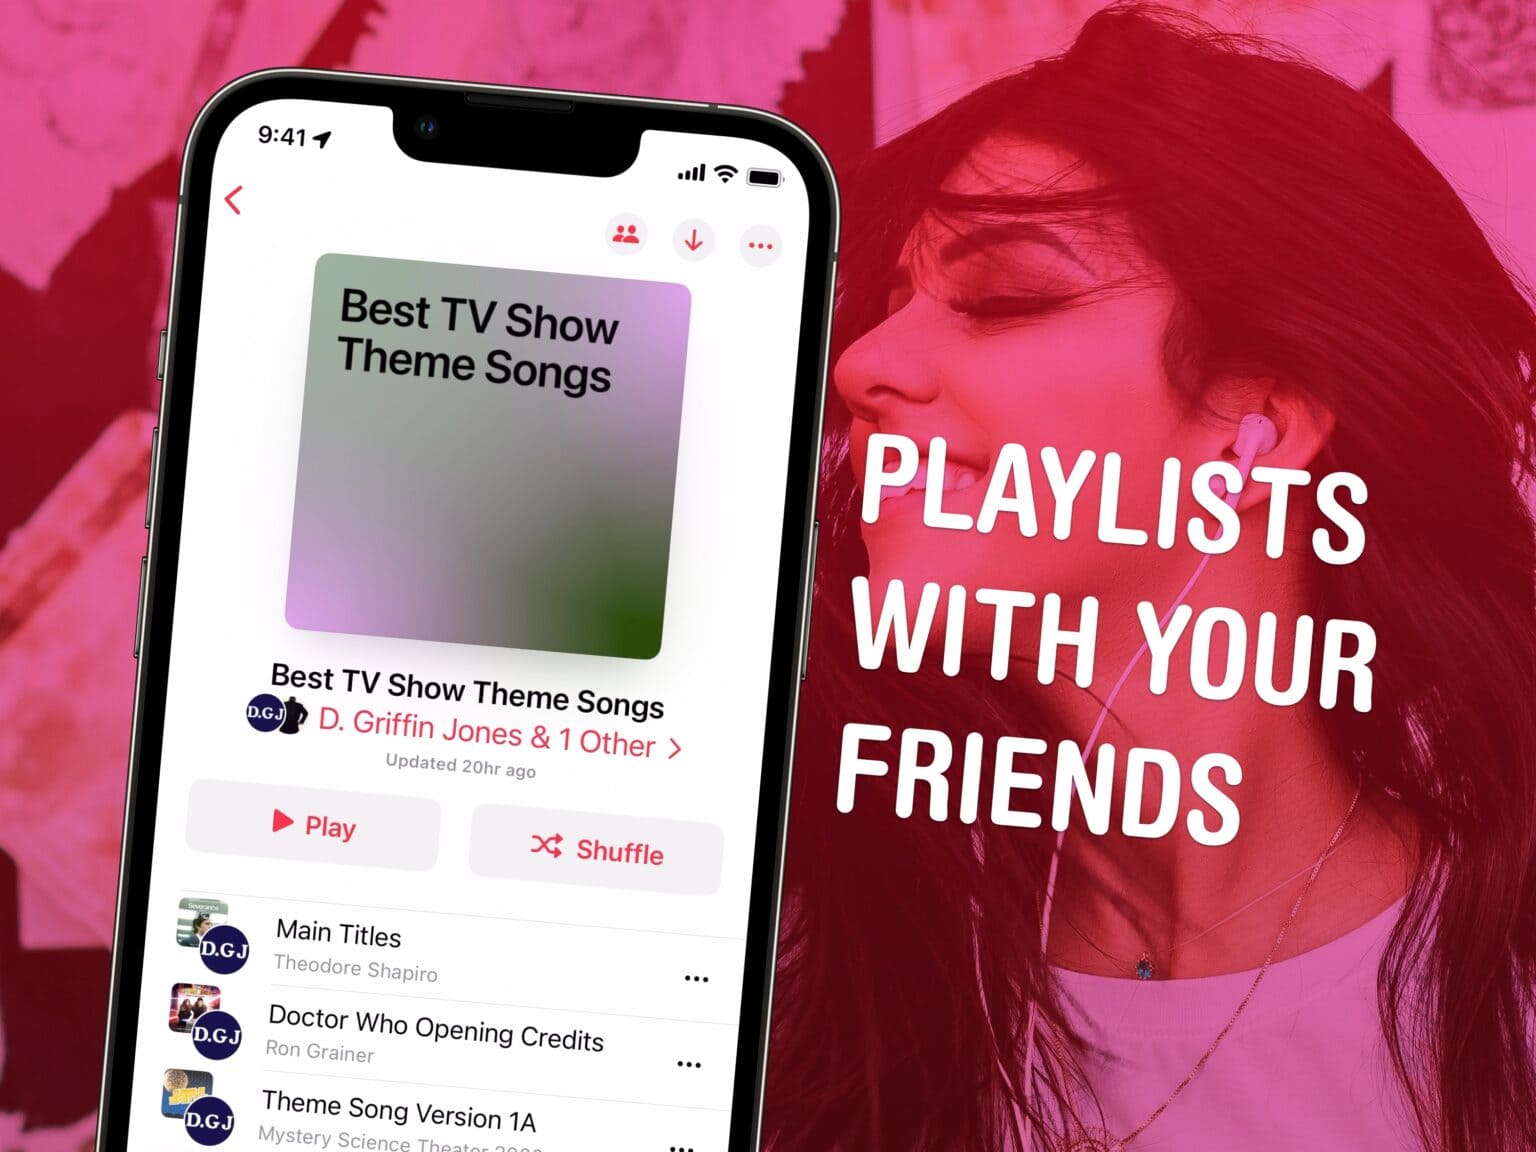 Playlists With Your Friends